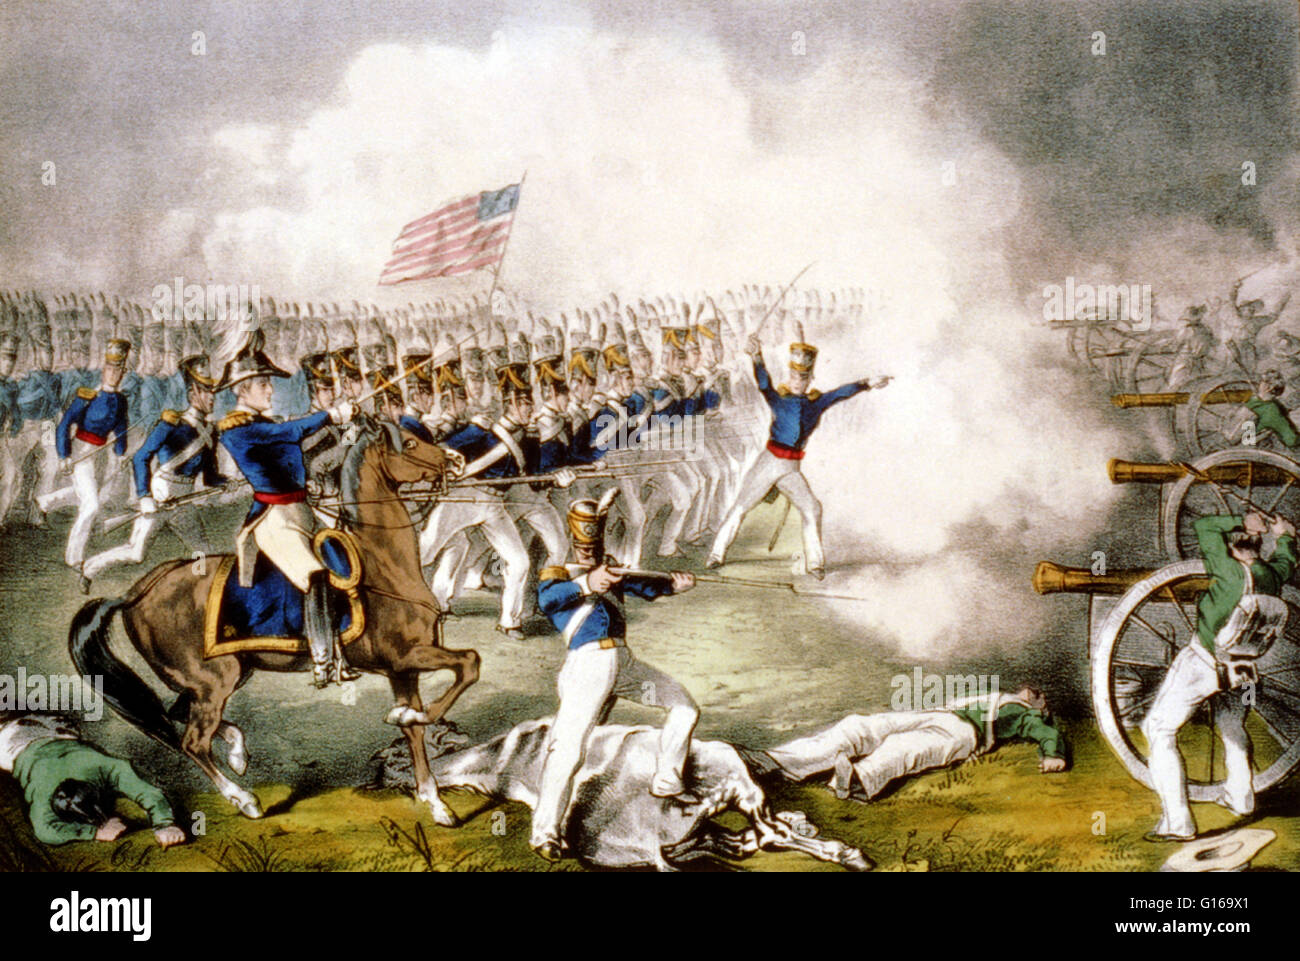 Lithograph entitled: 'General Taylor at the battle of Palo Alto.' The Battle of Palo Alto was the first major battle of the Mexican-American War and was fought on May 8, 1846, on disputed ground five miles from the modern-day city of Brownsville, Texas. A Stock Photo